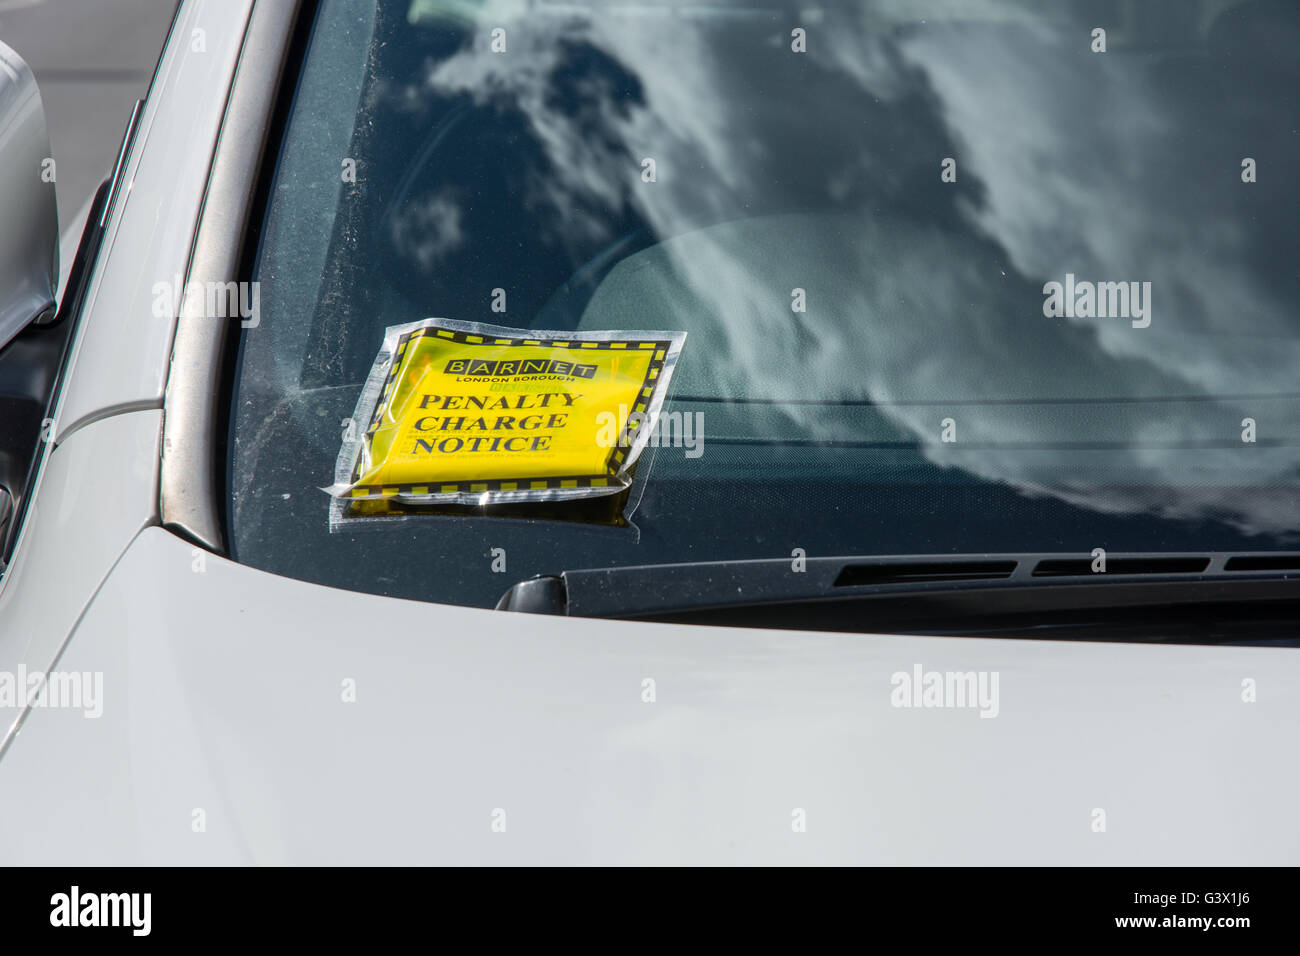 Penalty charge notice (parking fine) attached to windscreen of white car parked in high street London England Stock Photo